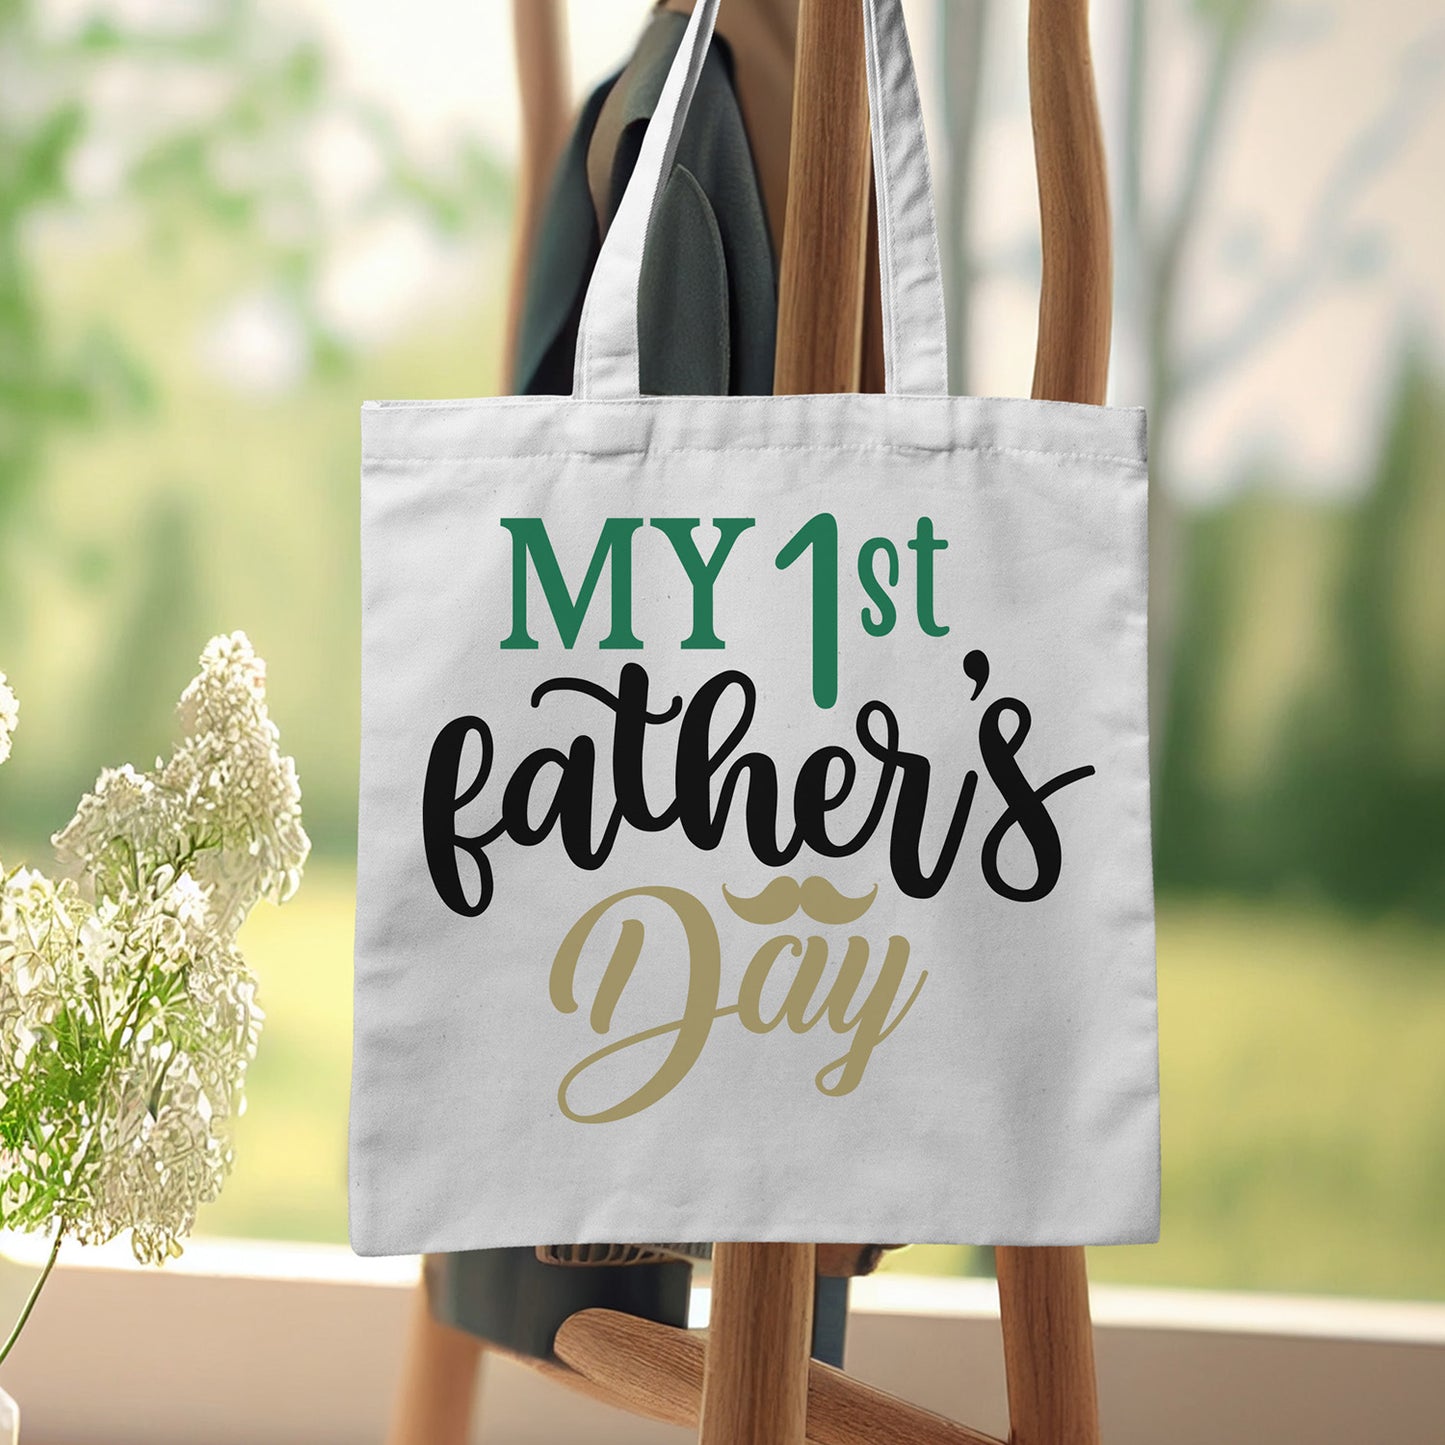 "My 1st Father's Day" With Mustache Graphic